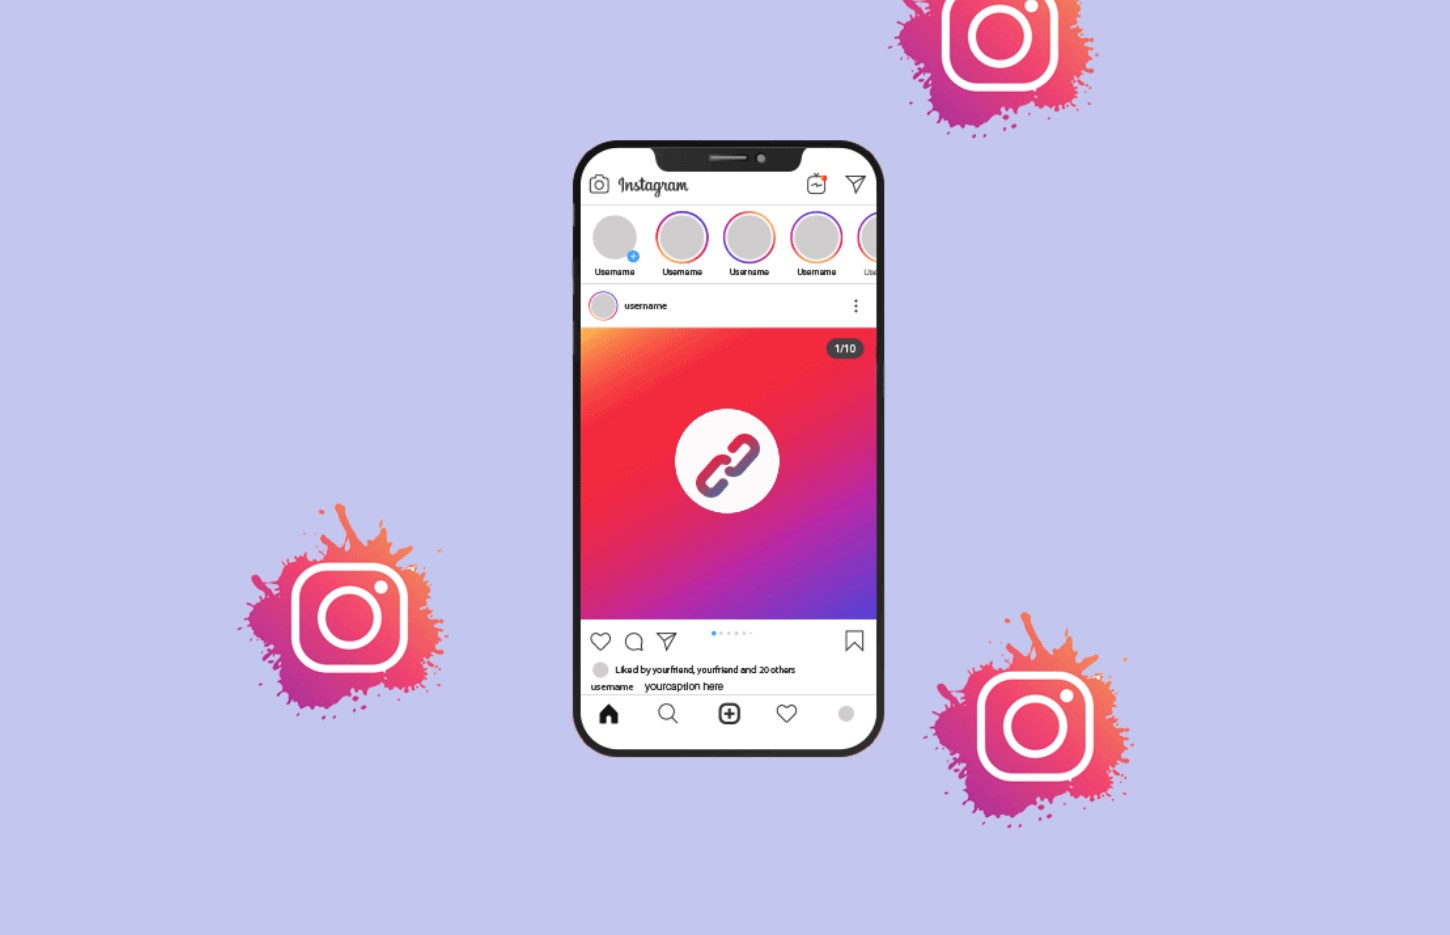 How to Share a Link on Instagram